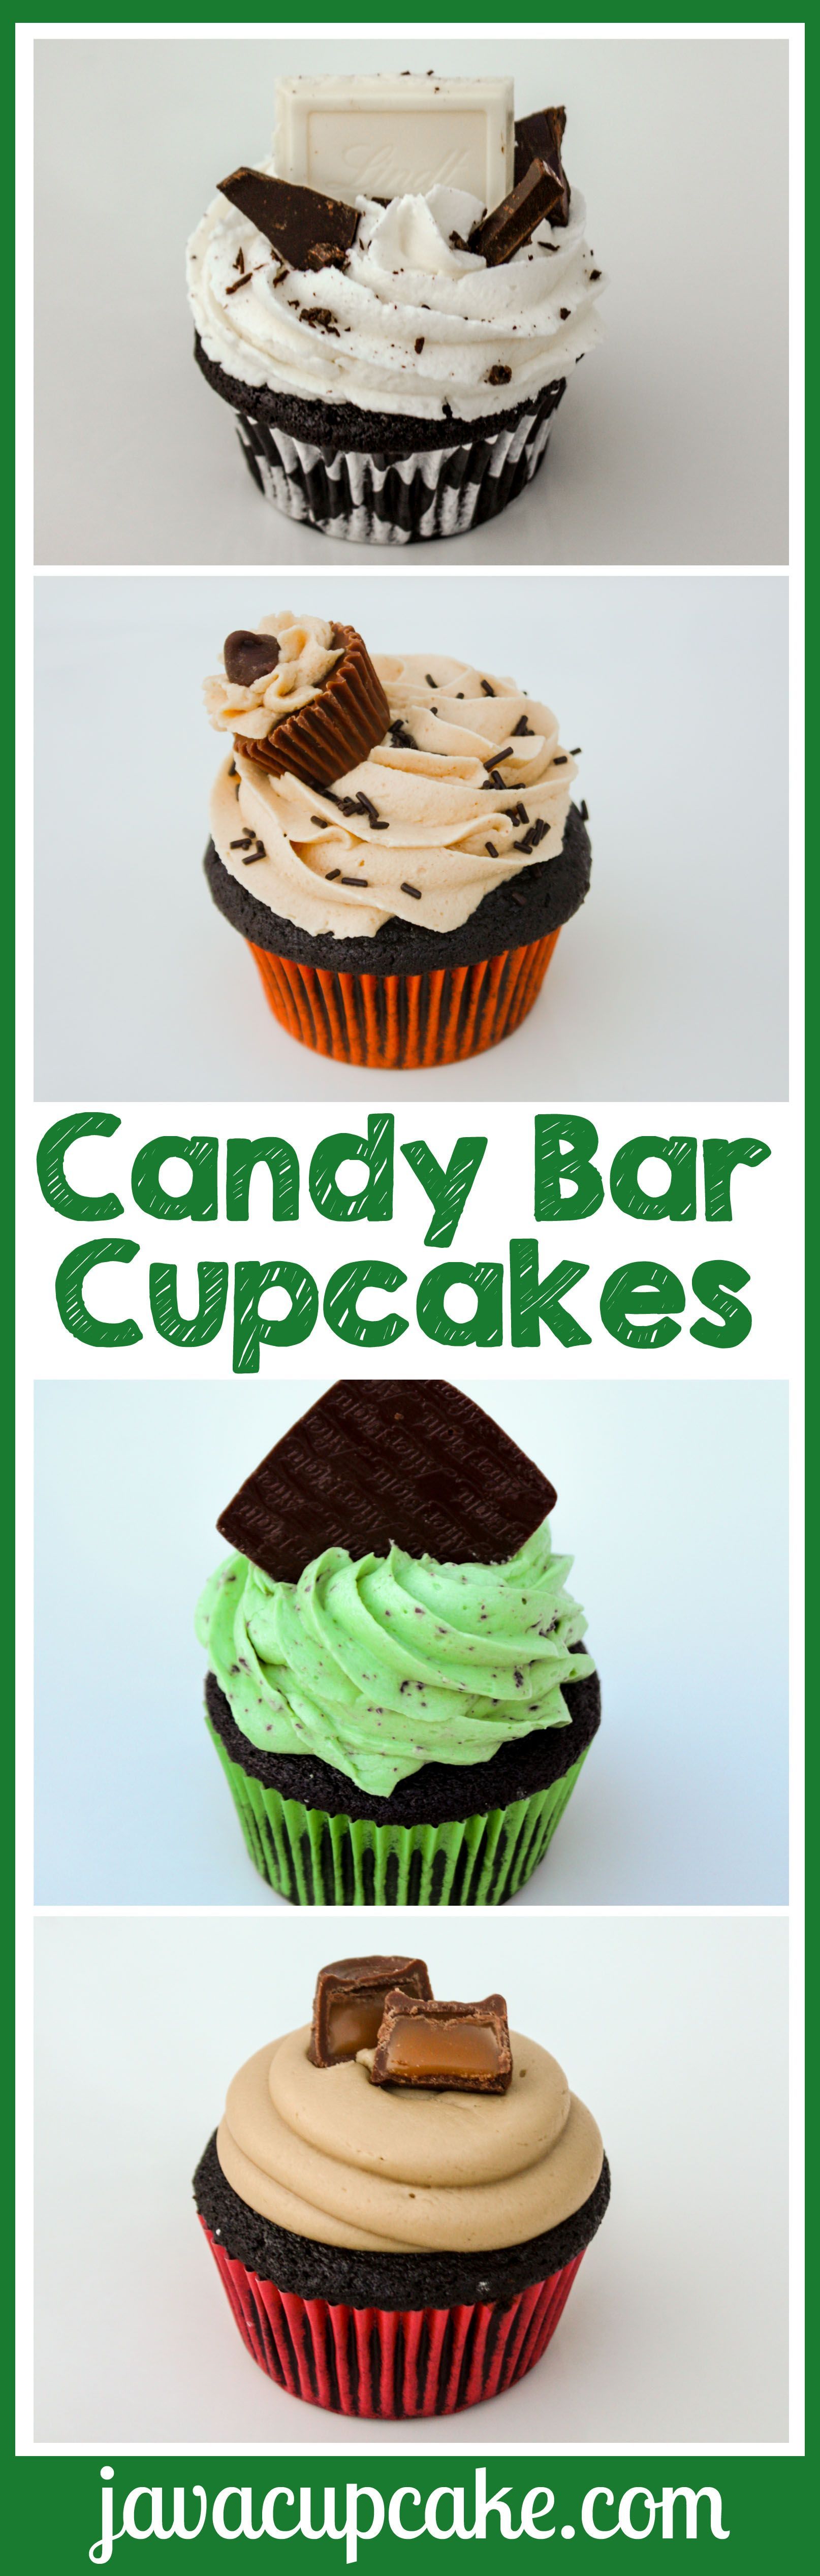 Rich dark chocolate cupcakes made into four very different, extremely delectable, incredibly delicious candy bar-inspired